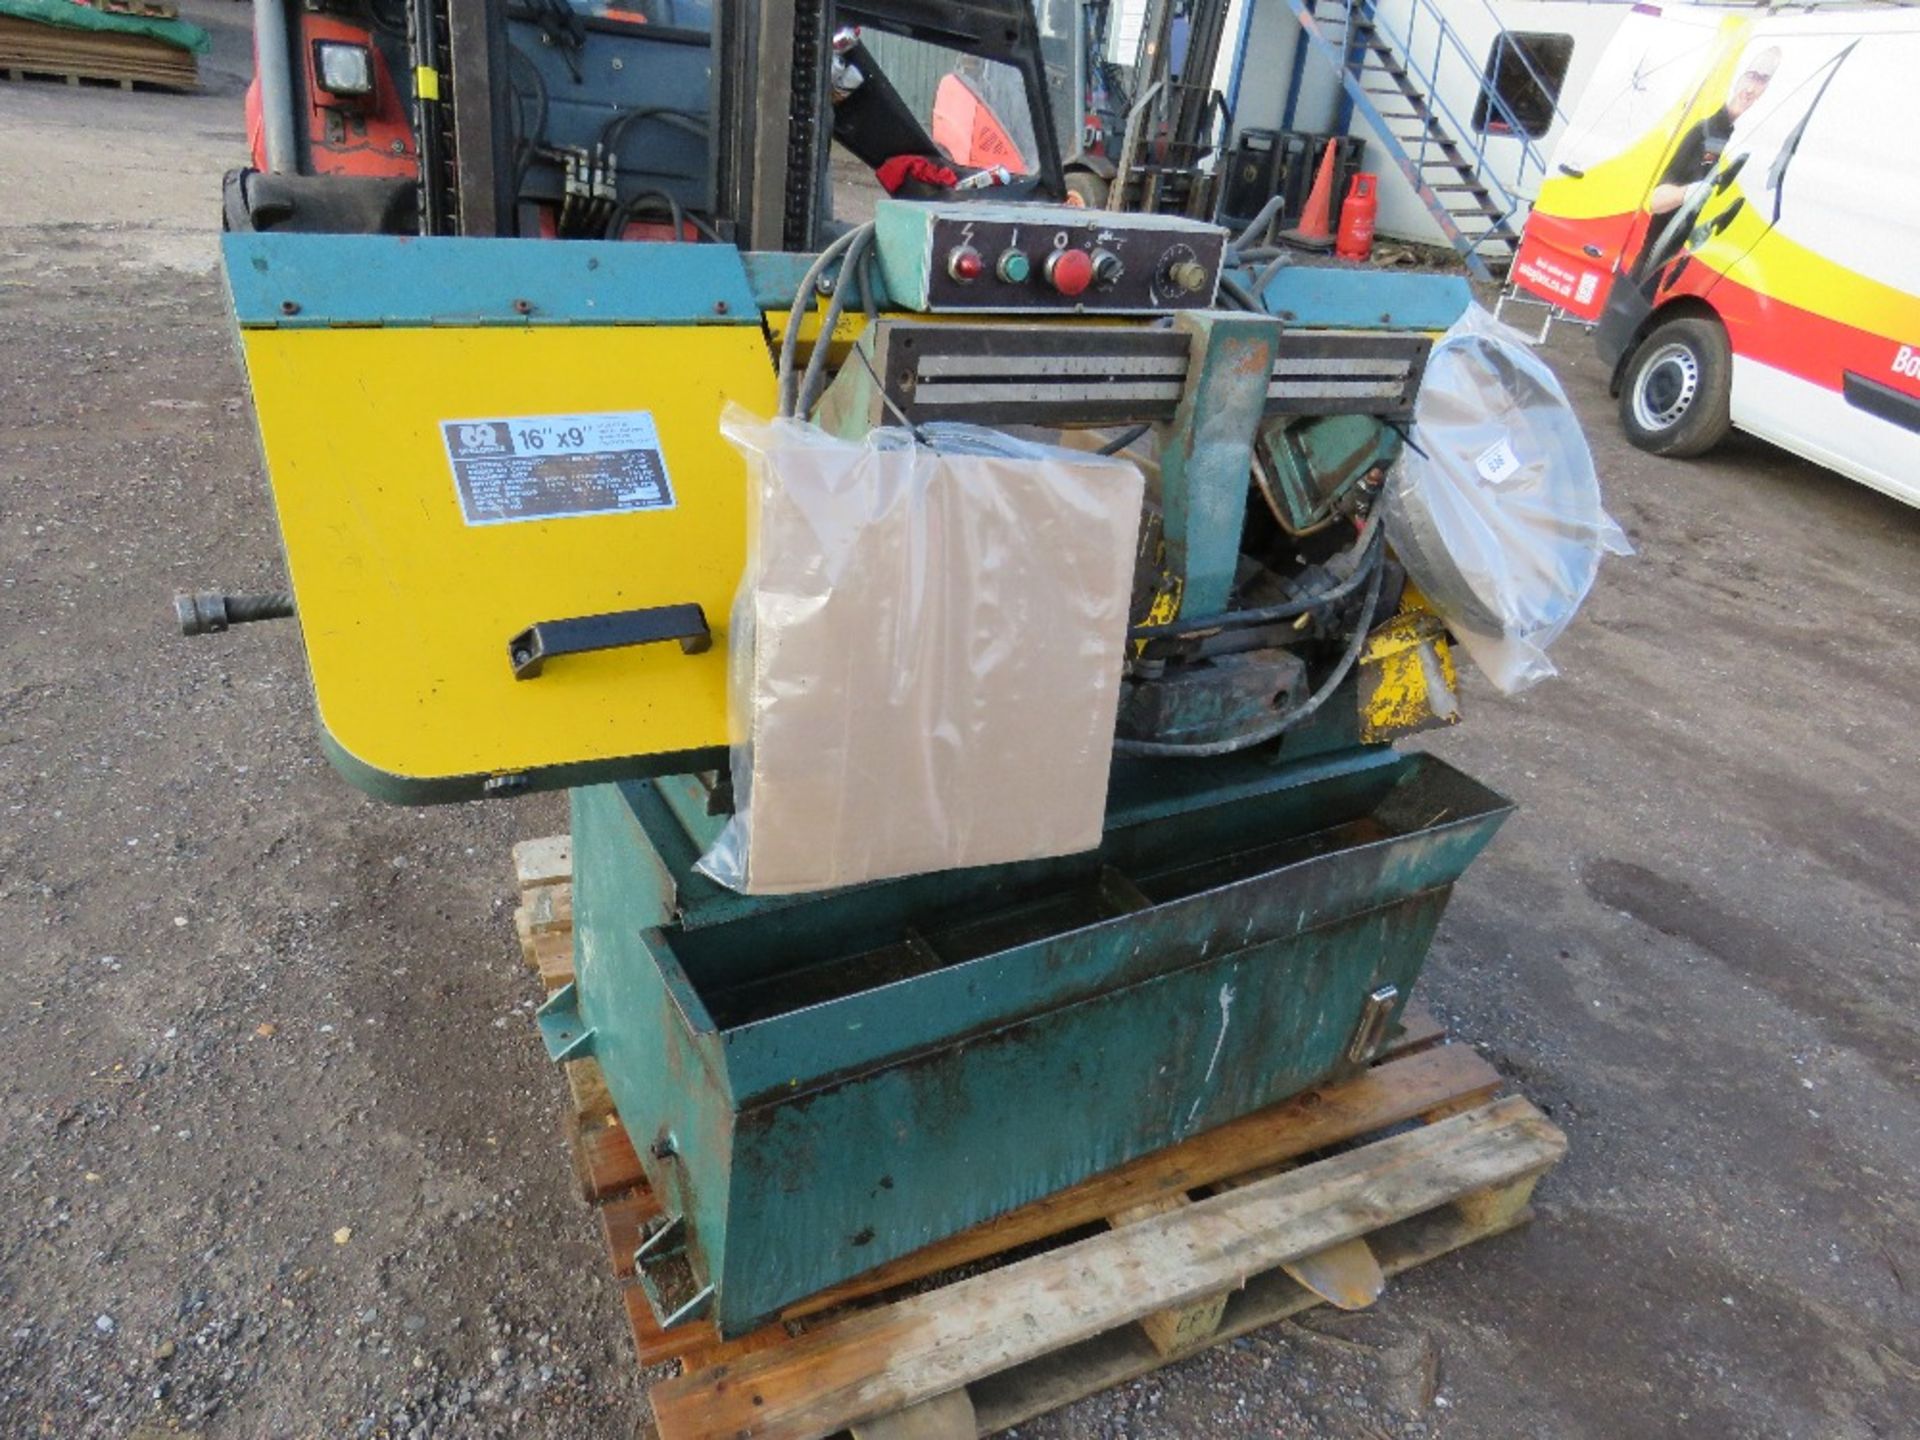 3 PHASE POWERED METAL CUTTING BANDSAW C/W SPARE BLADES. DIRECT EX LOCAL FARM...WORKING WHEN RECENTLY